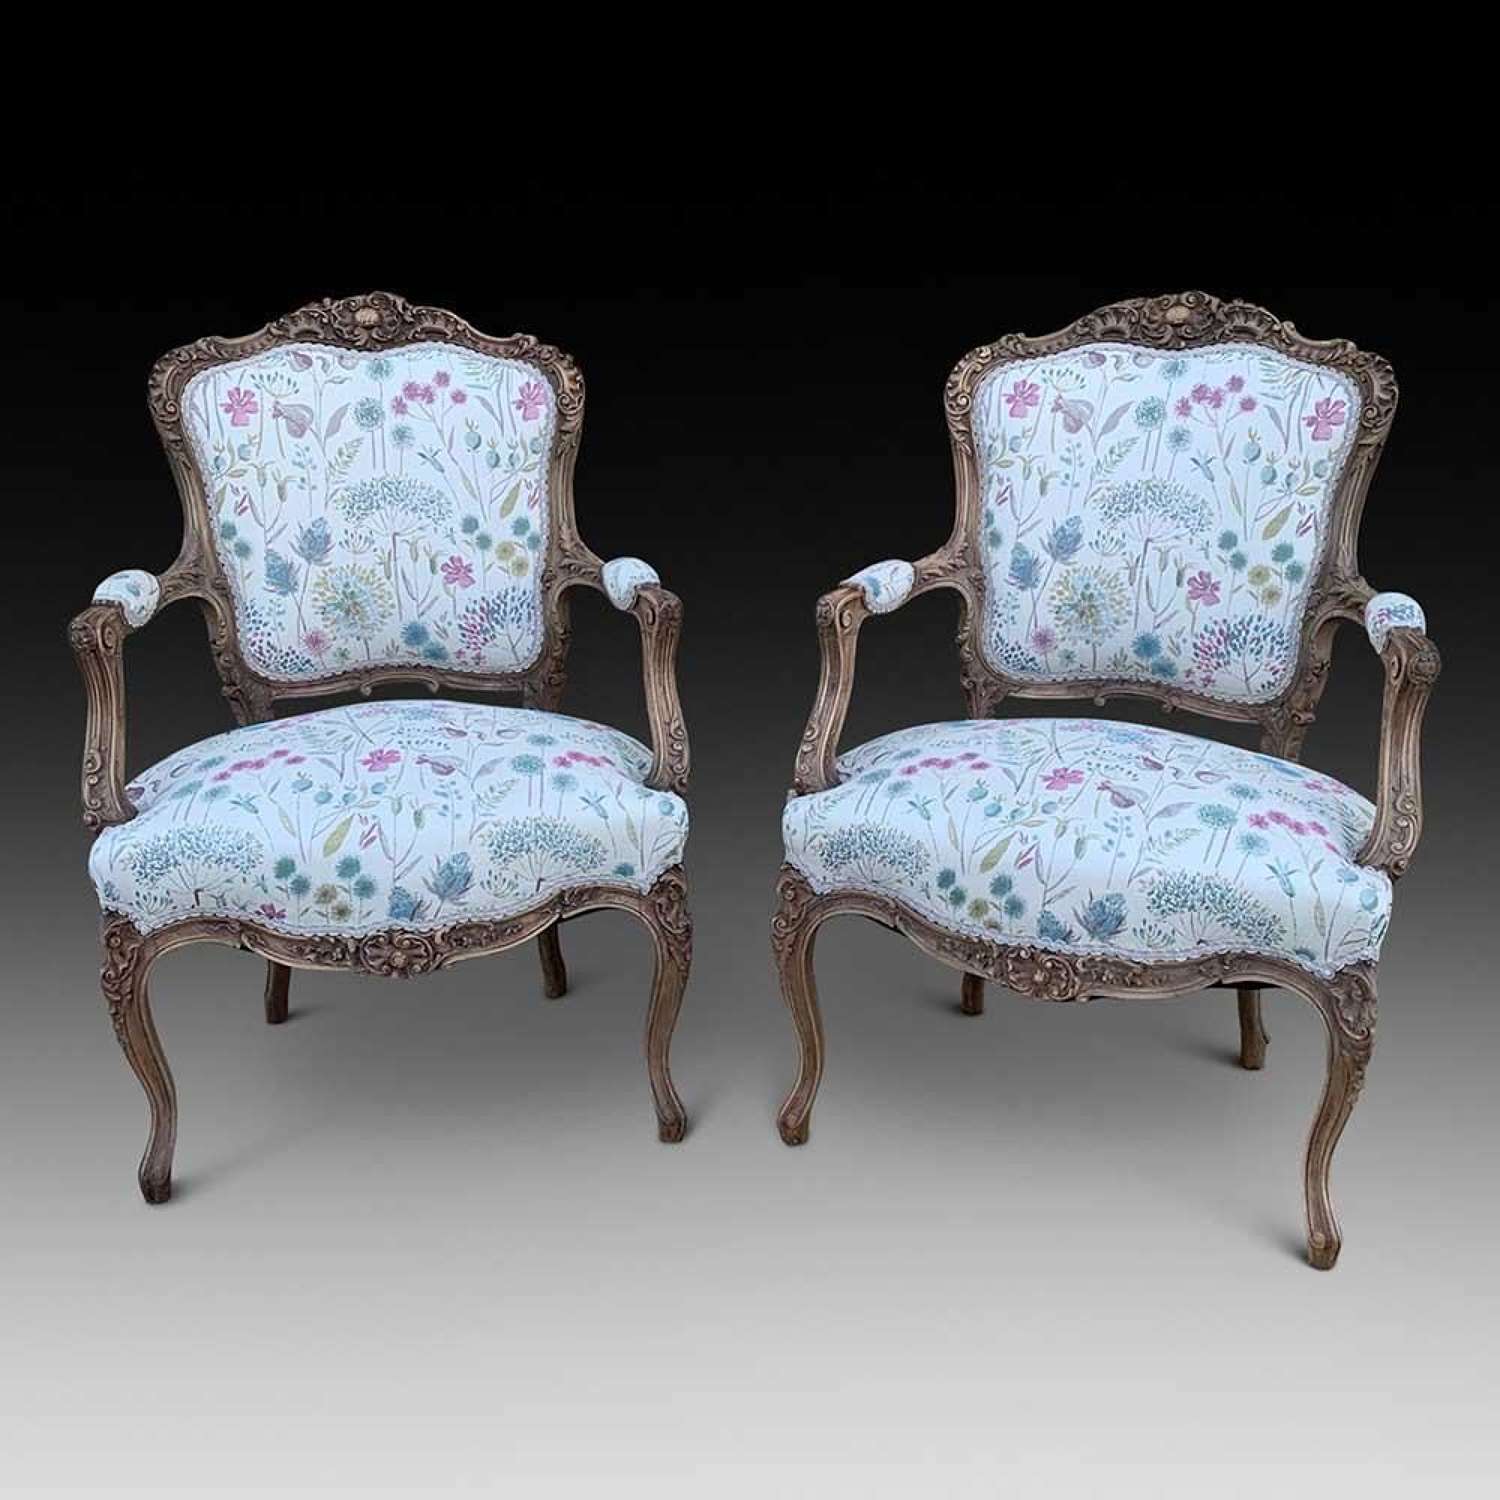 Pair of Bleached Walnut Armchairs ca. 1840-1860